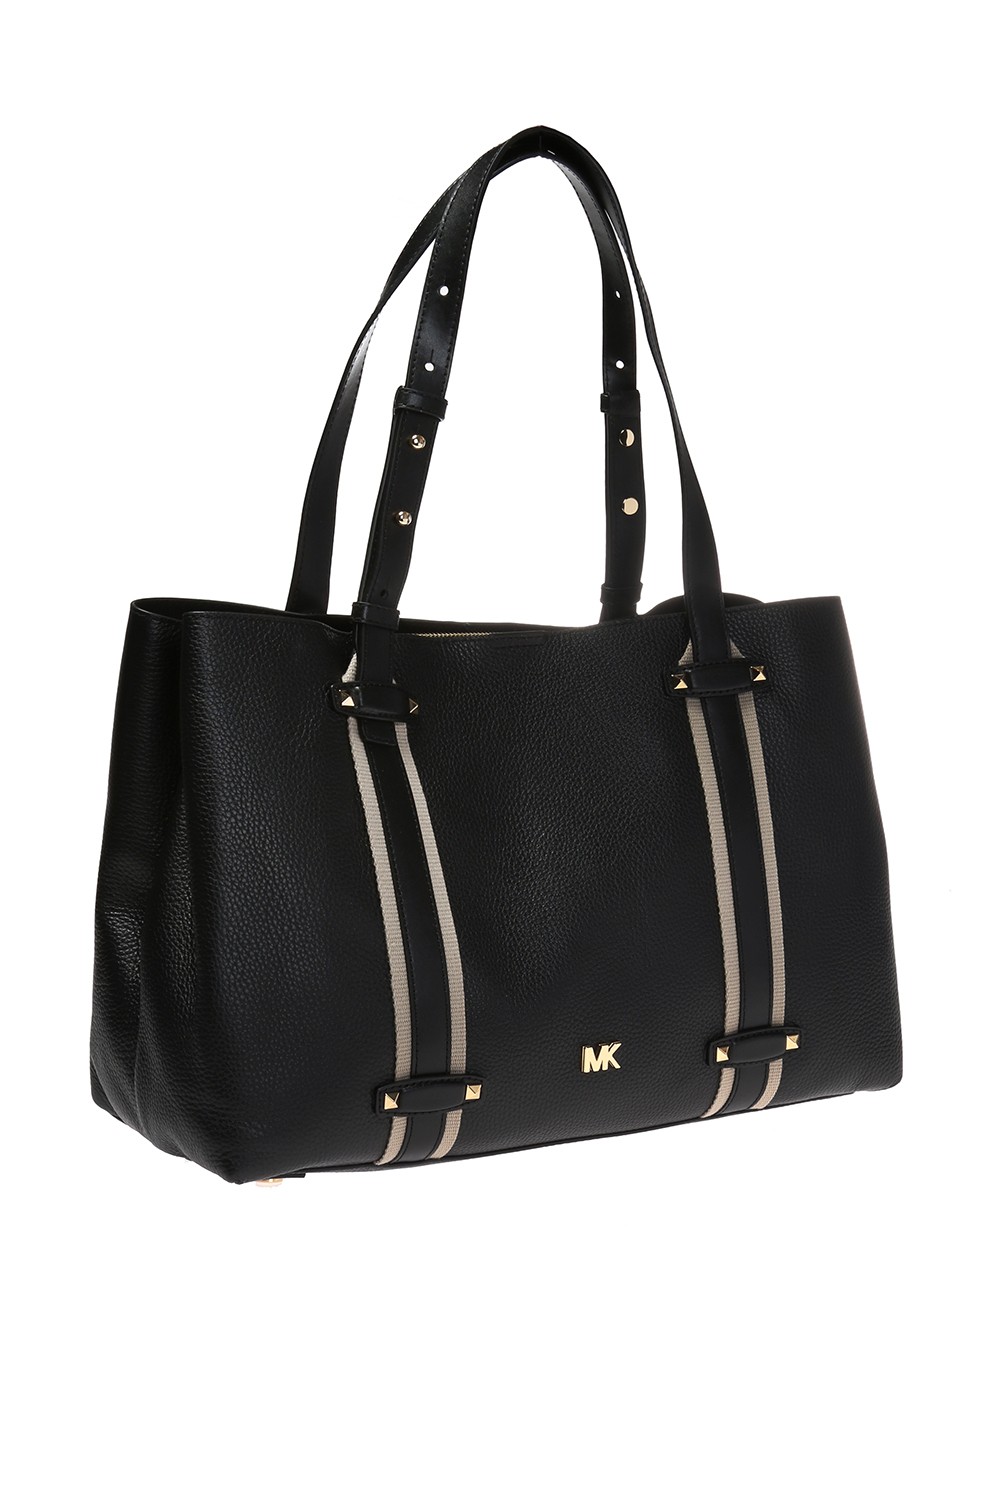 michael kors griffin tote